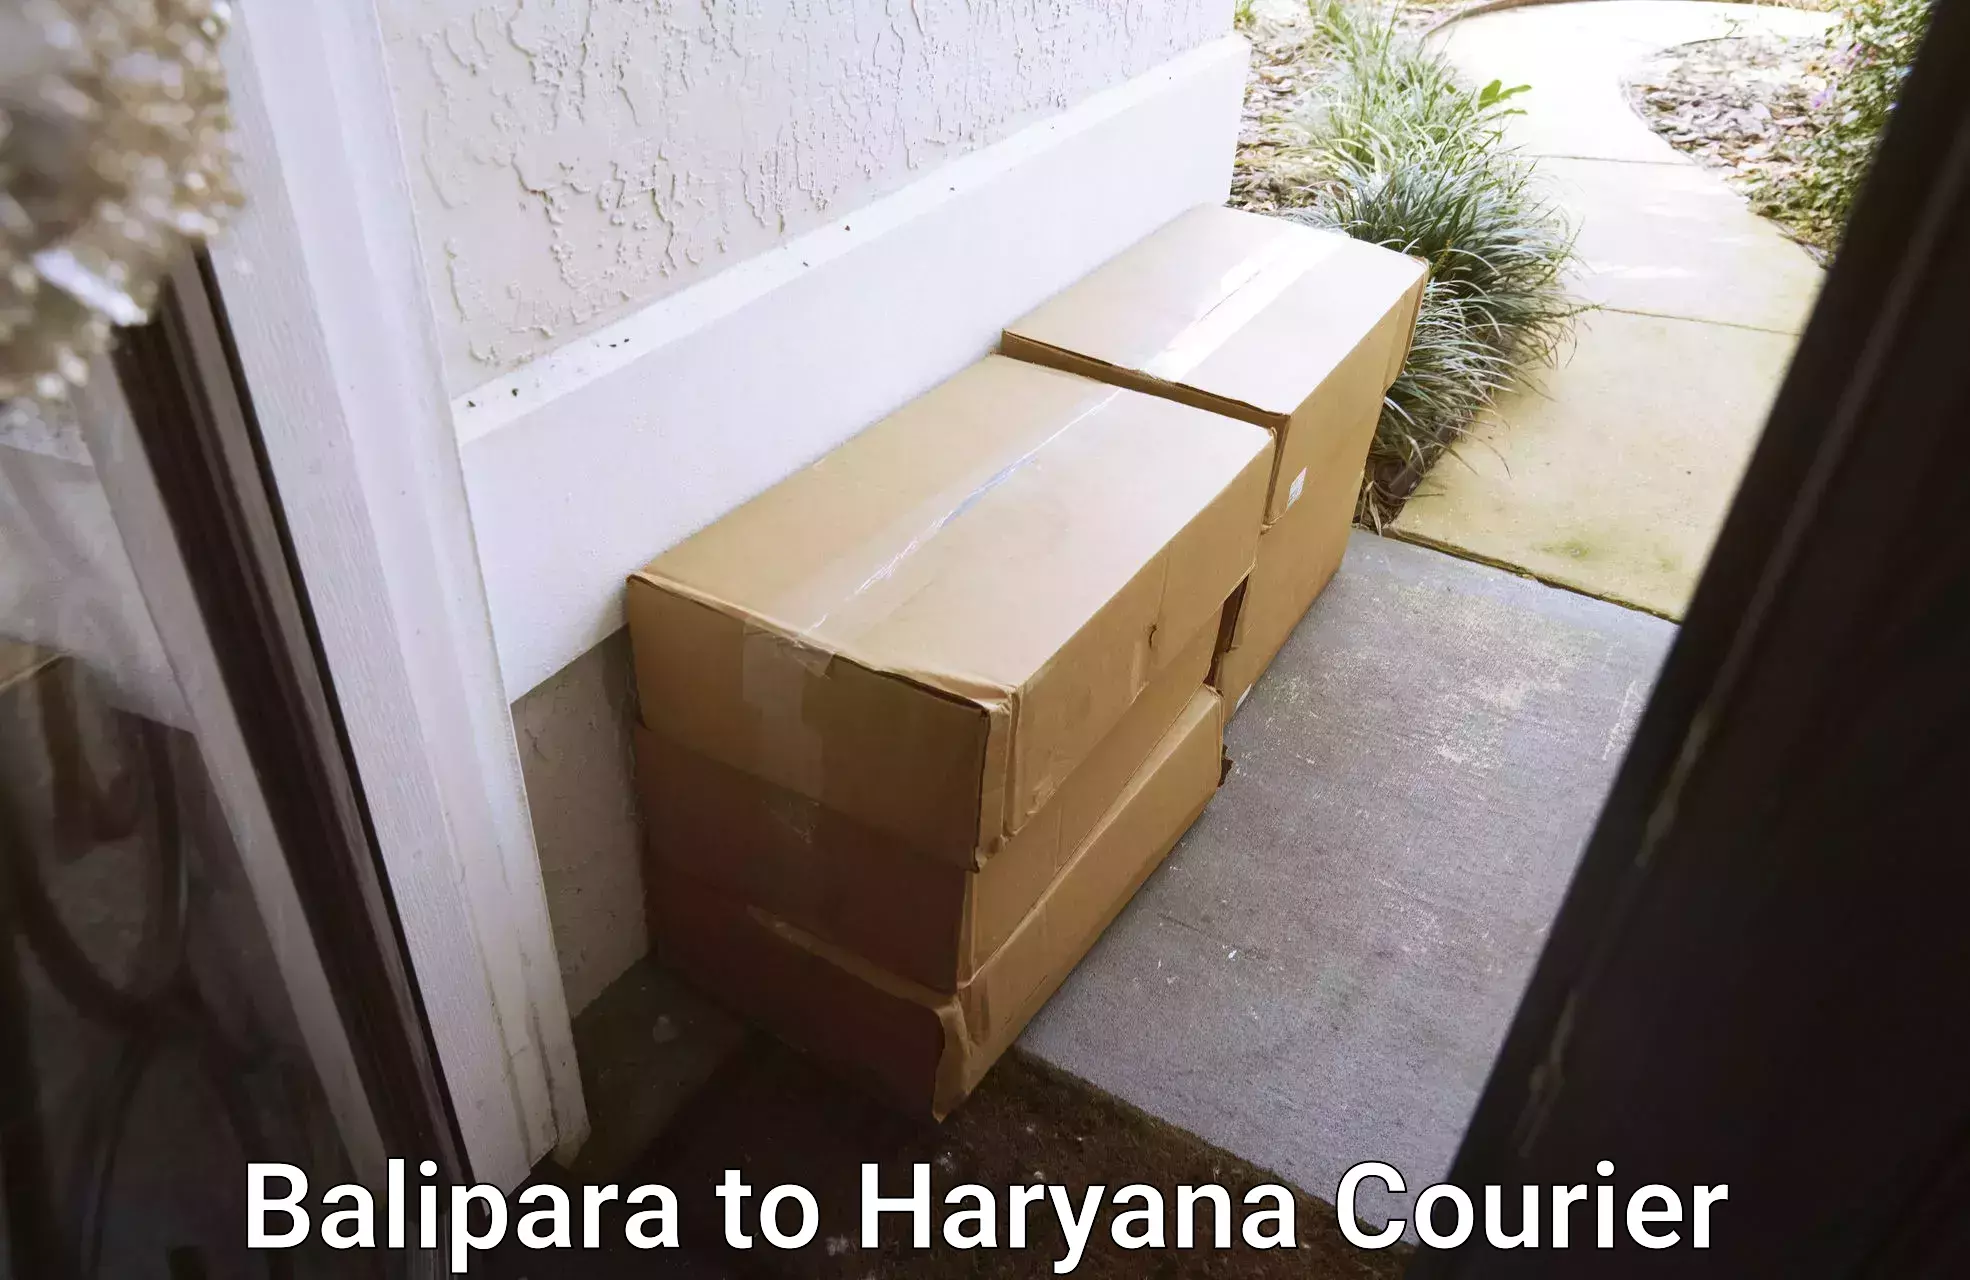 Package delivery network Balipara to Gurugram